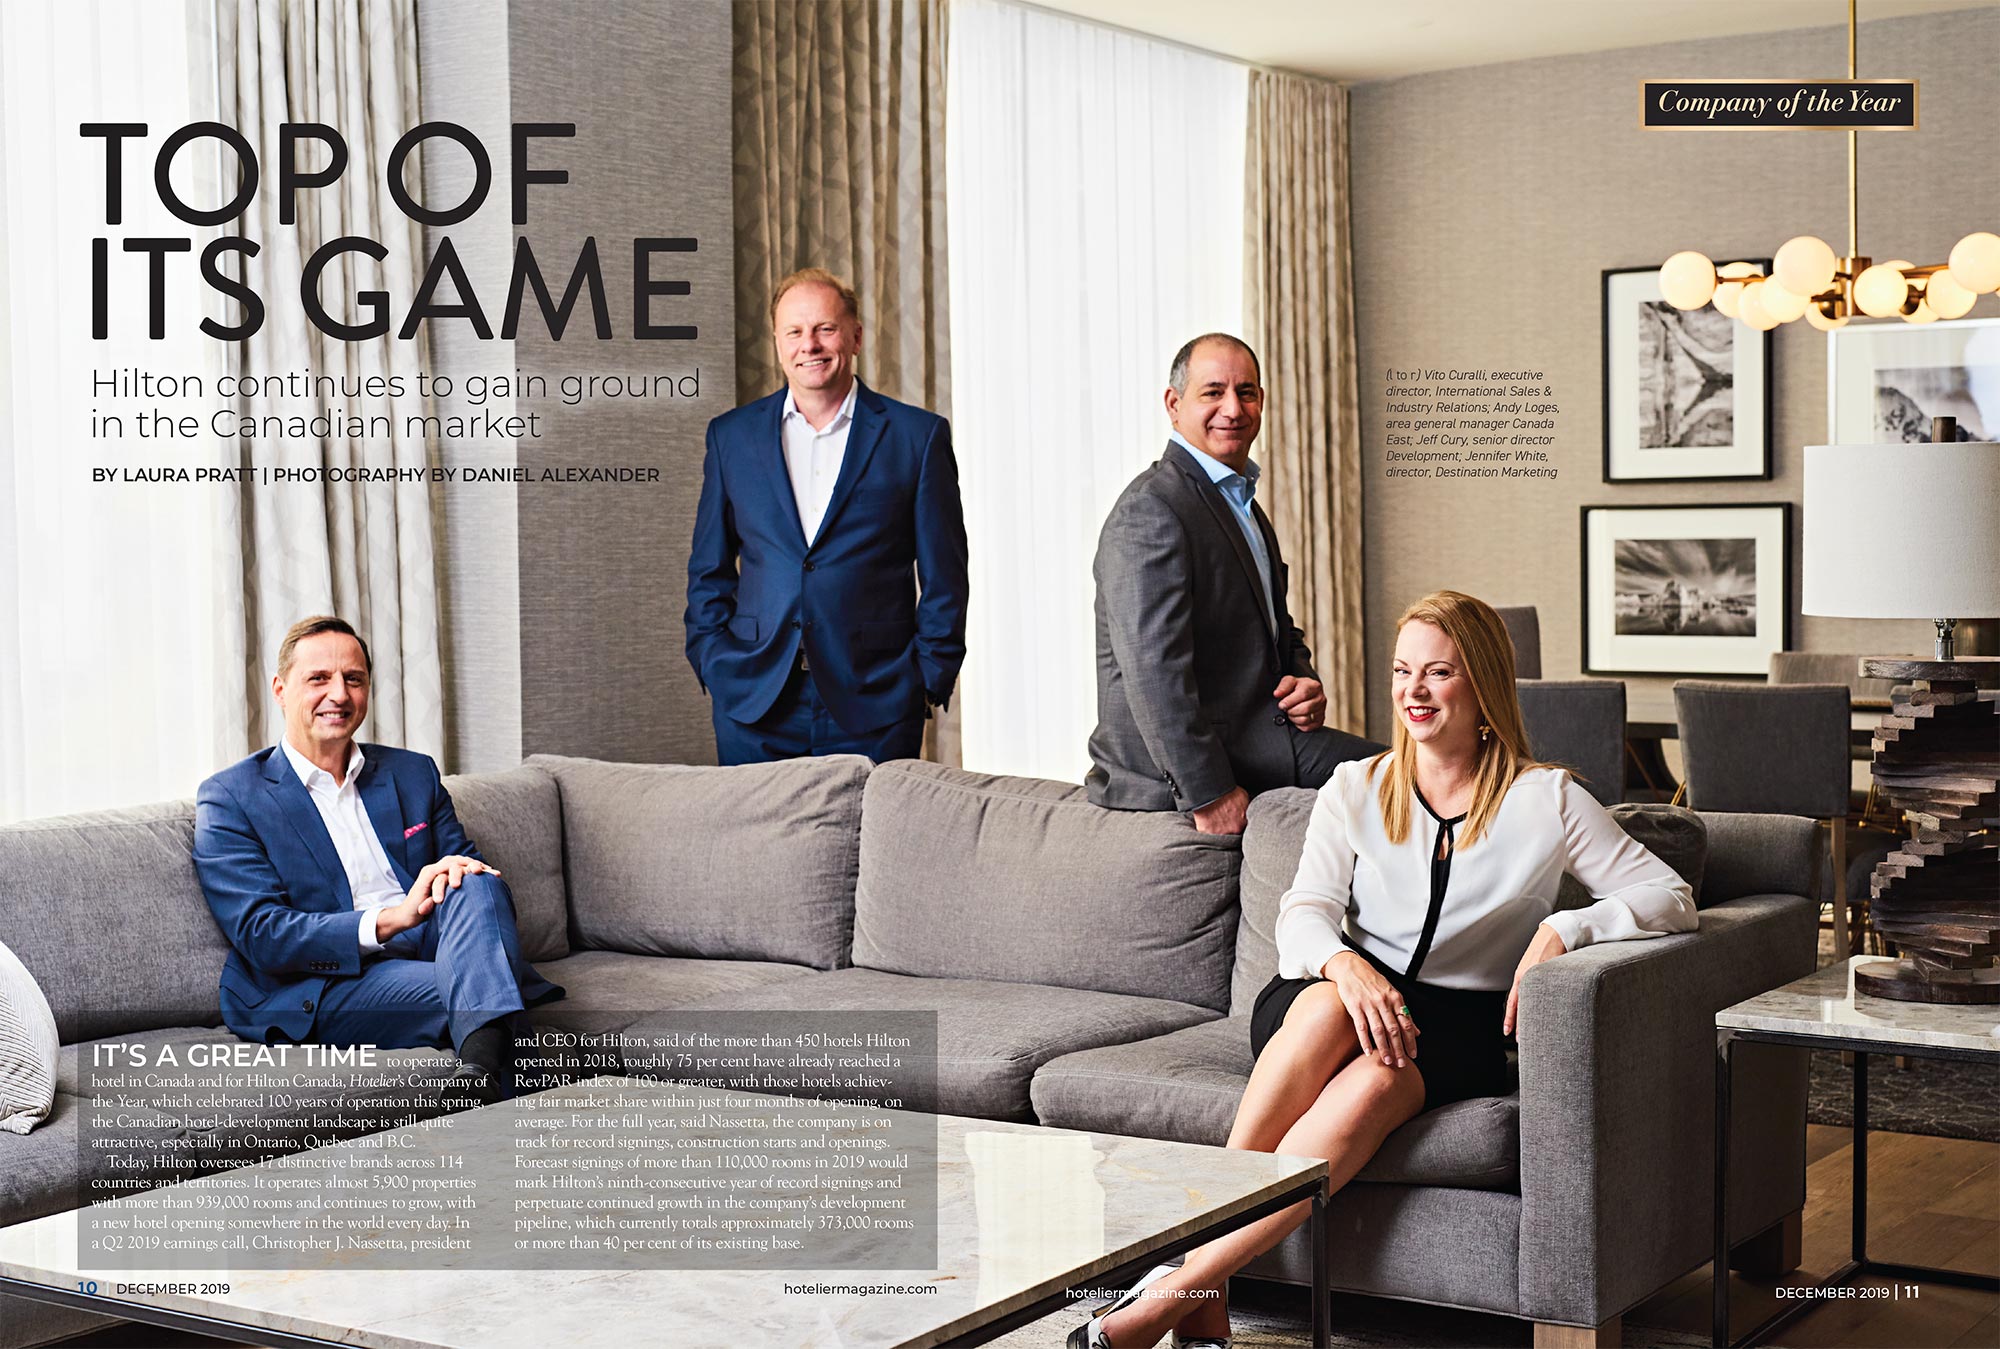 Four business corporate executives seated in modern upscale hotel room